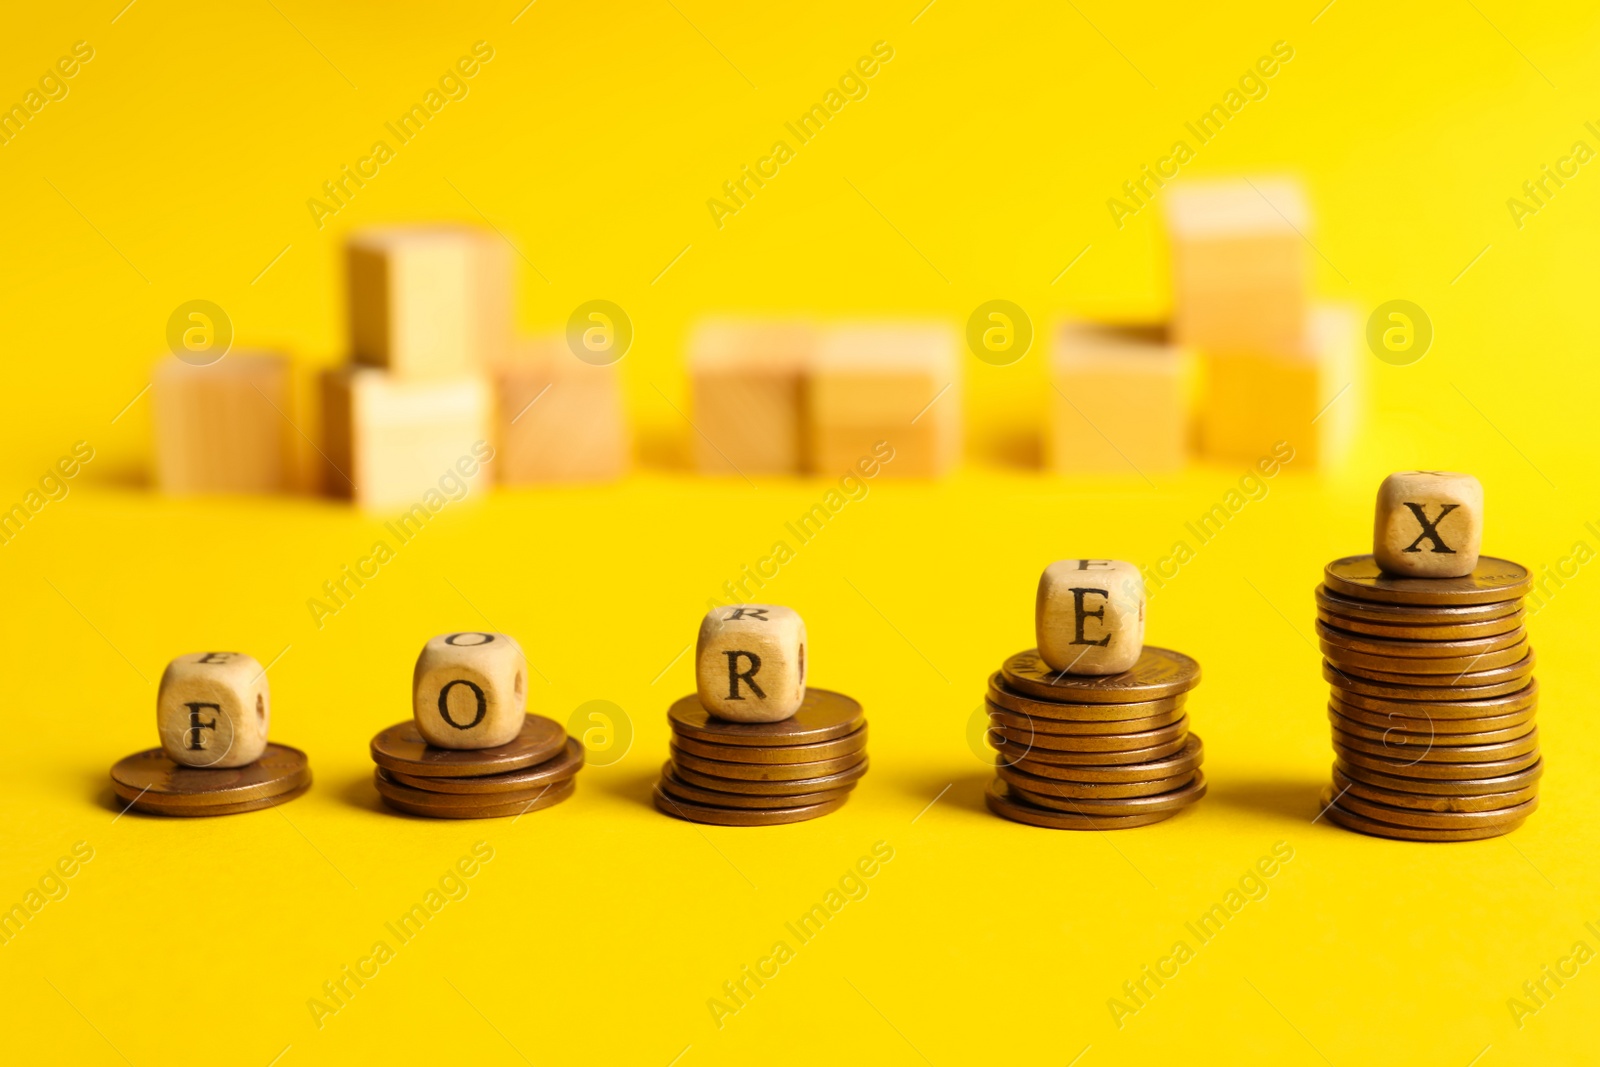 Photo of Word Forex made of wooden cubes with letters on stacked coins against yellow background